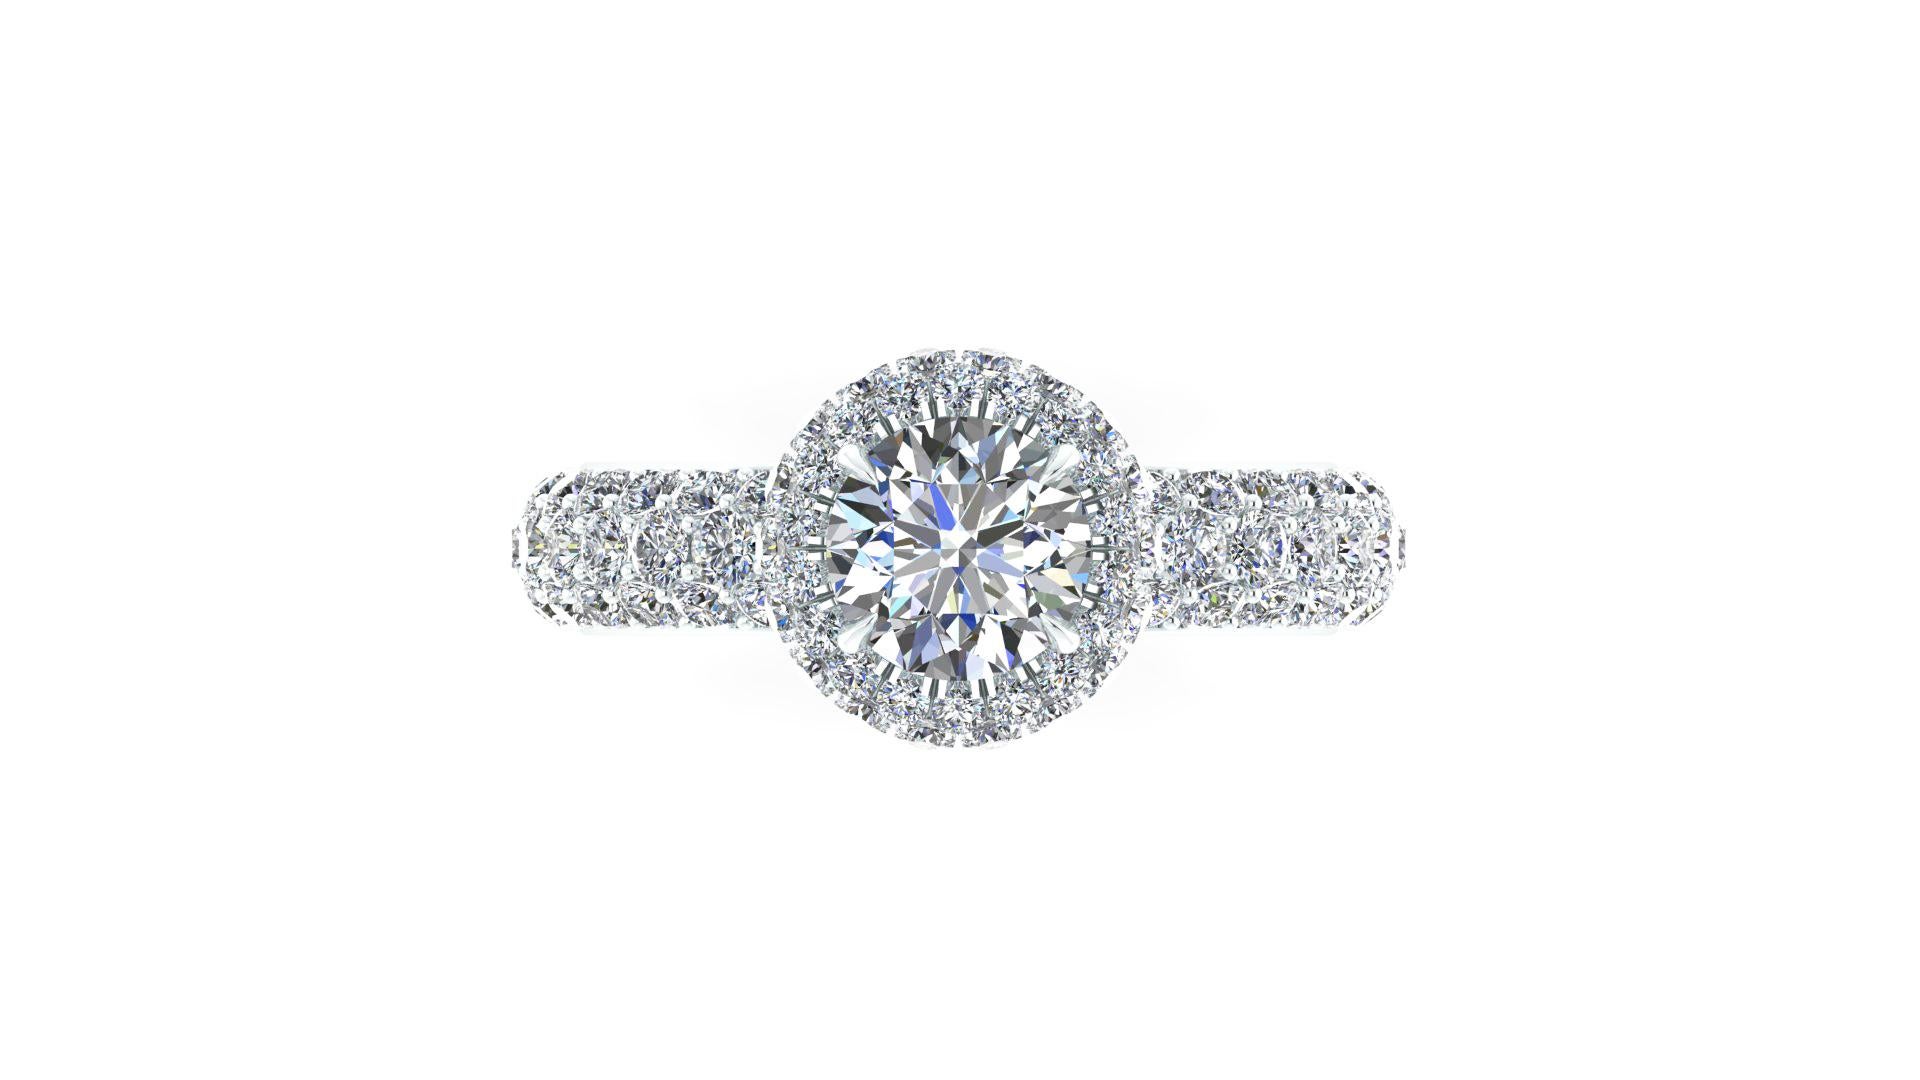 GIA Certified 1.06 Round diamond, G color, IF clarity, Internally Flawless with Triple Excellent Specs. a stunning classic, incredibly beautiful diamond set in a hand made Double Round Halo diamond and a triple pave' set diamond shank eternity style